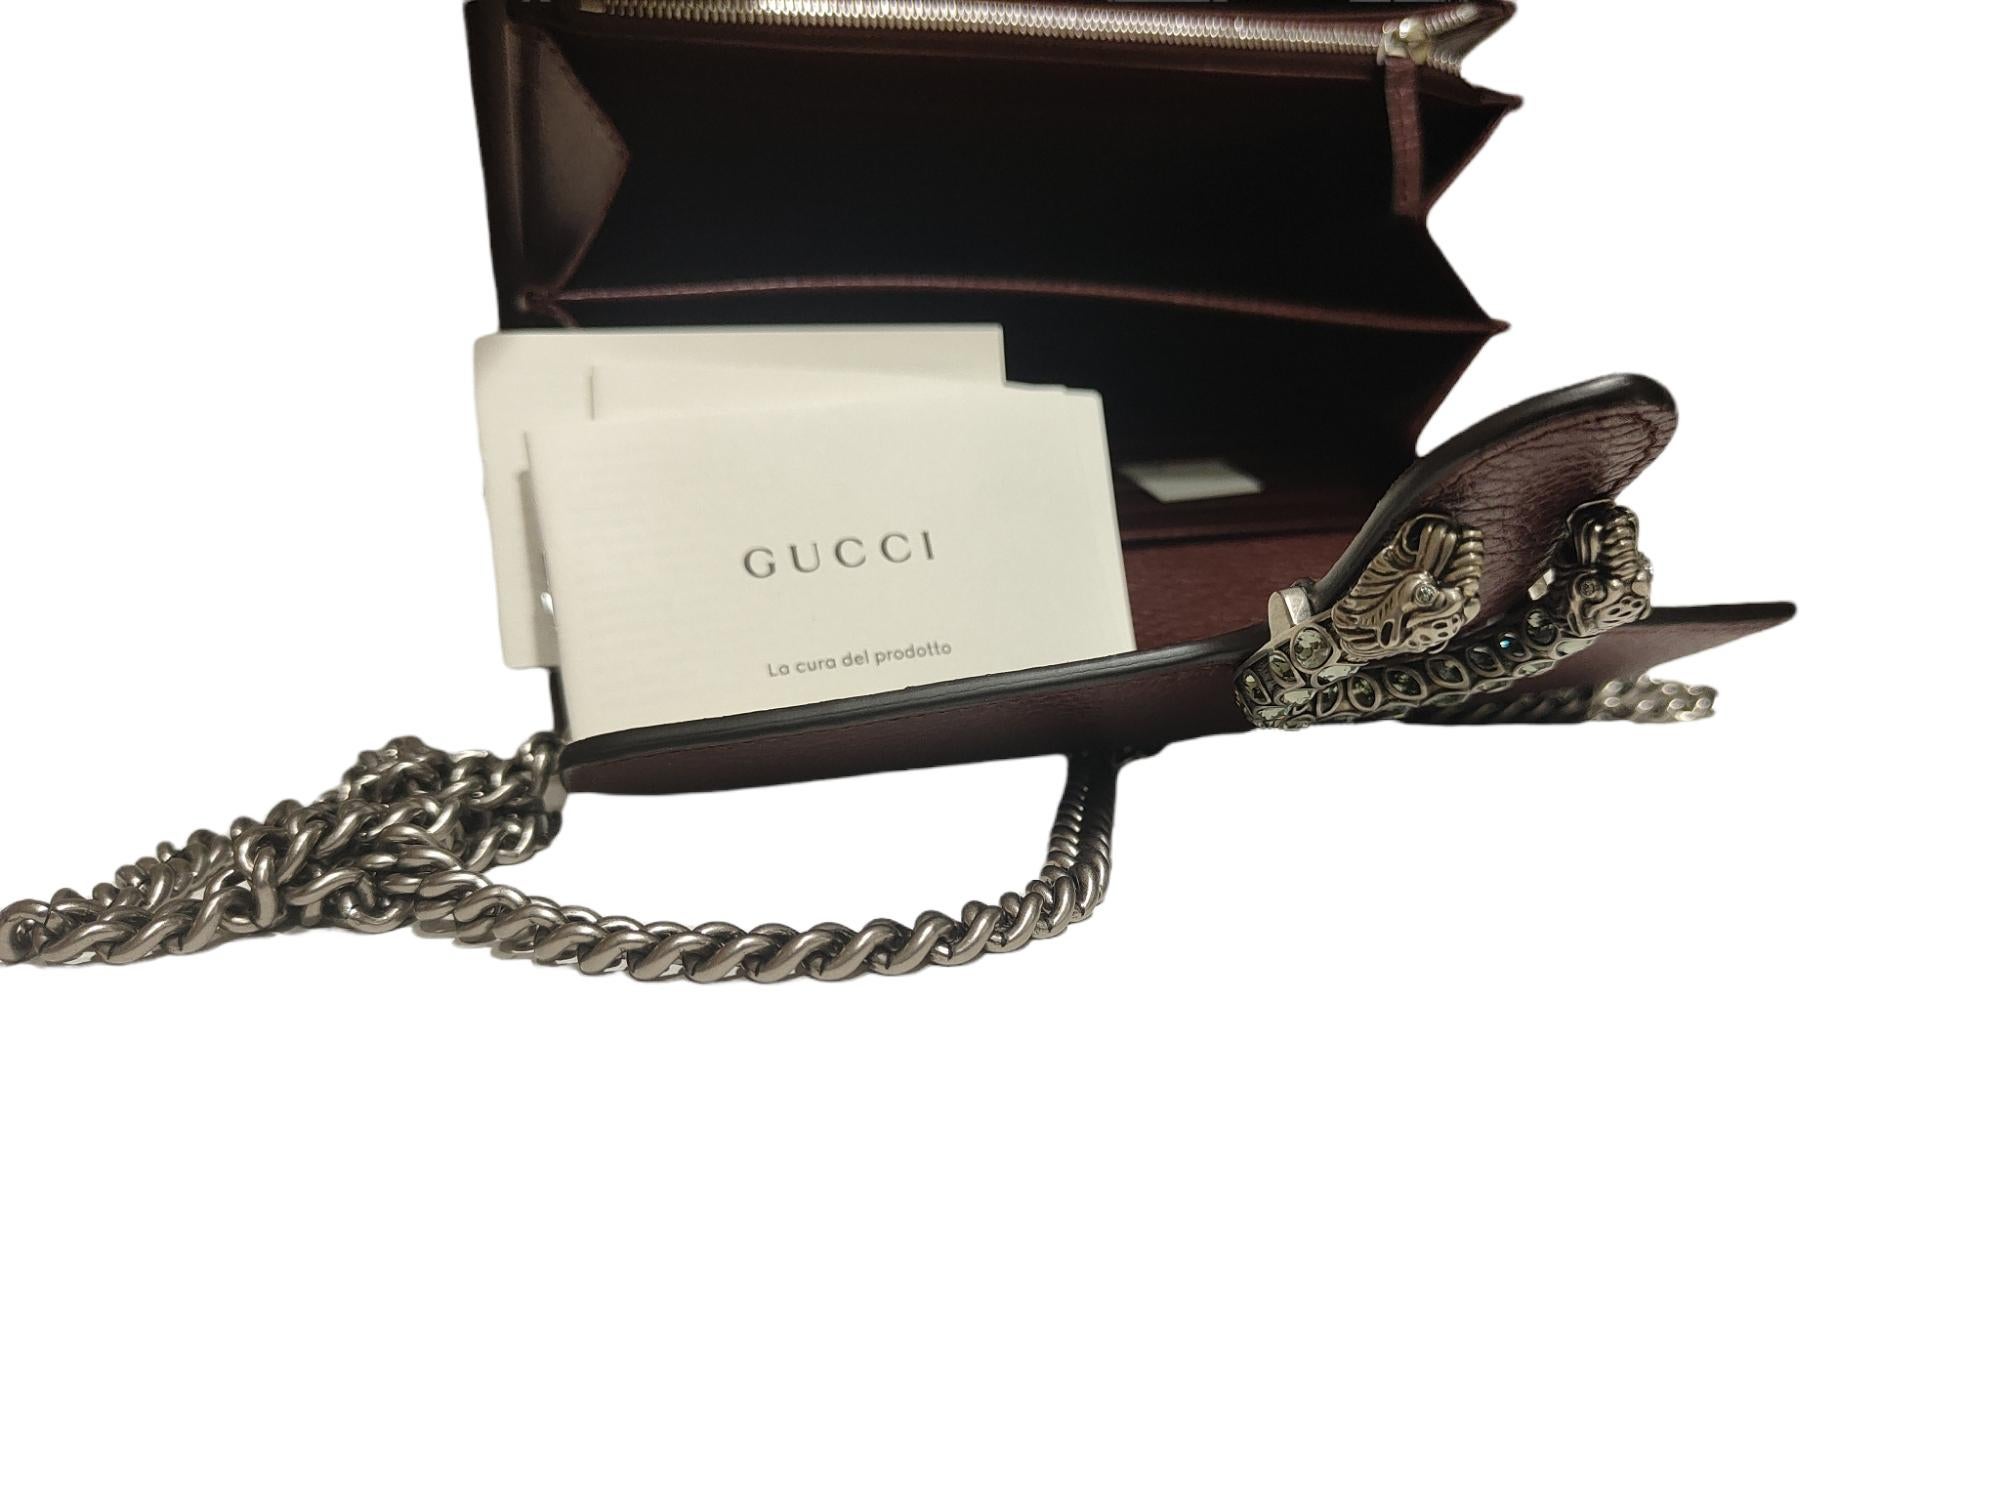 A structured leather chain mini bag or wallet with textured tiger head spur closure-a unique detail referencing the Greek god Dionysus, who in myth is said to have crossed the river Tigris on a tiger sent to him by Zeus. The tiger head closure is